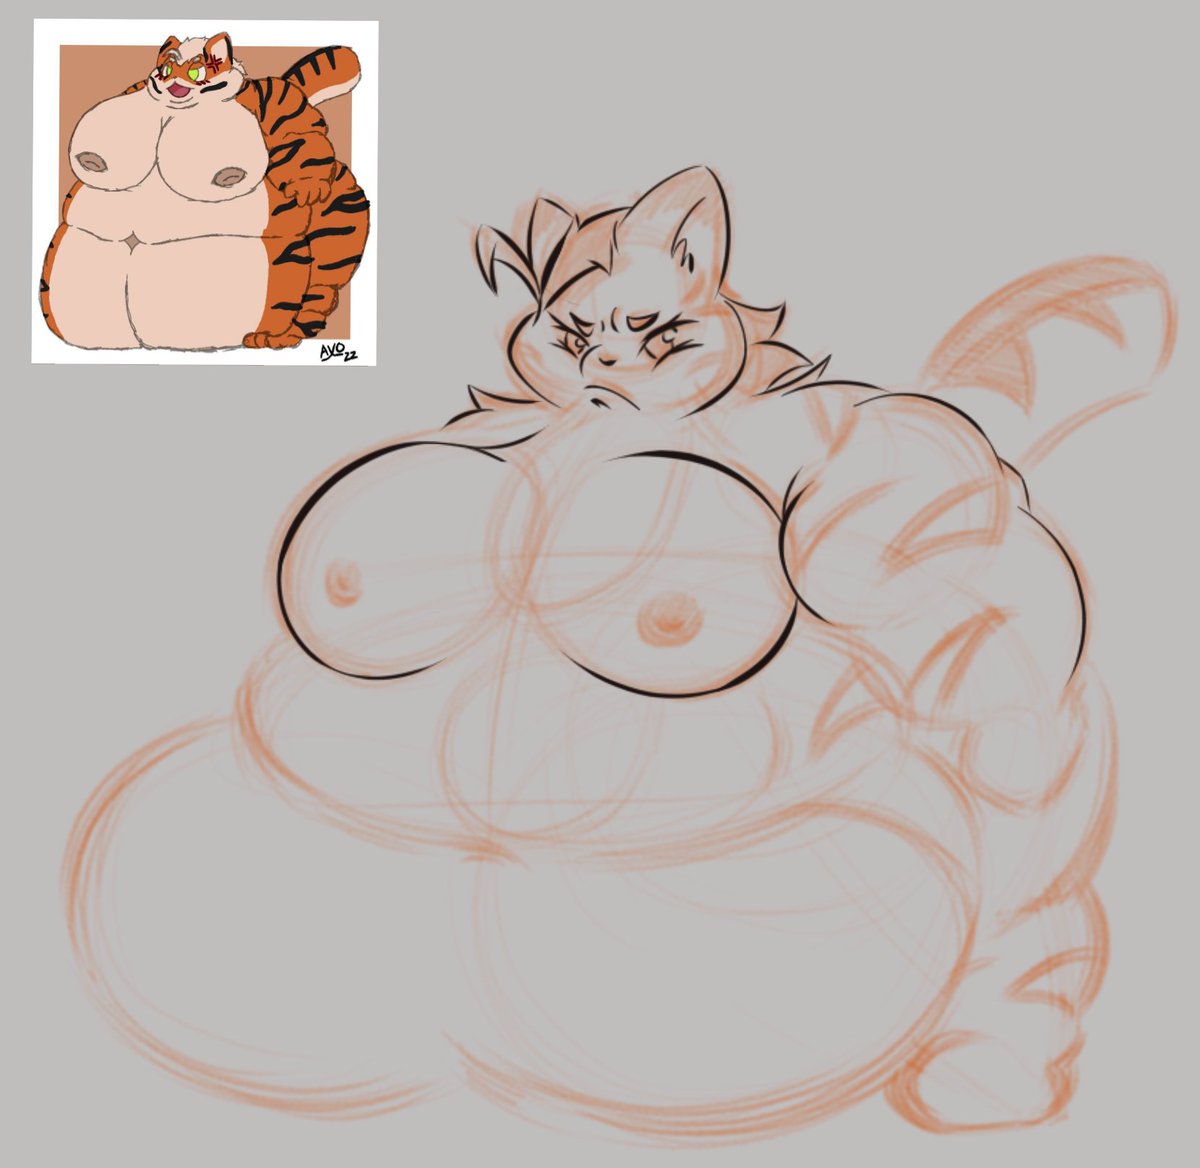 Gonna post last night's WIP.
Redrawing a piece I got a while ago, adapting the expression into more of a pout.

Looks like she's enjoying the extra weight alright~